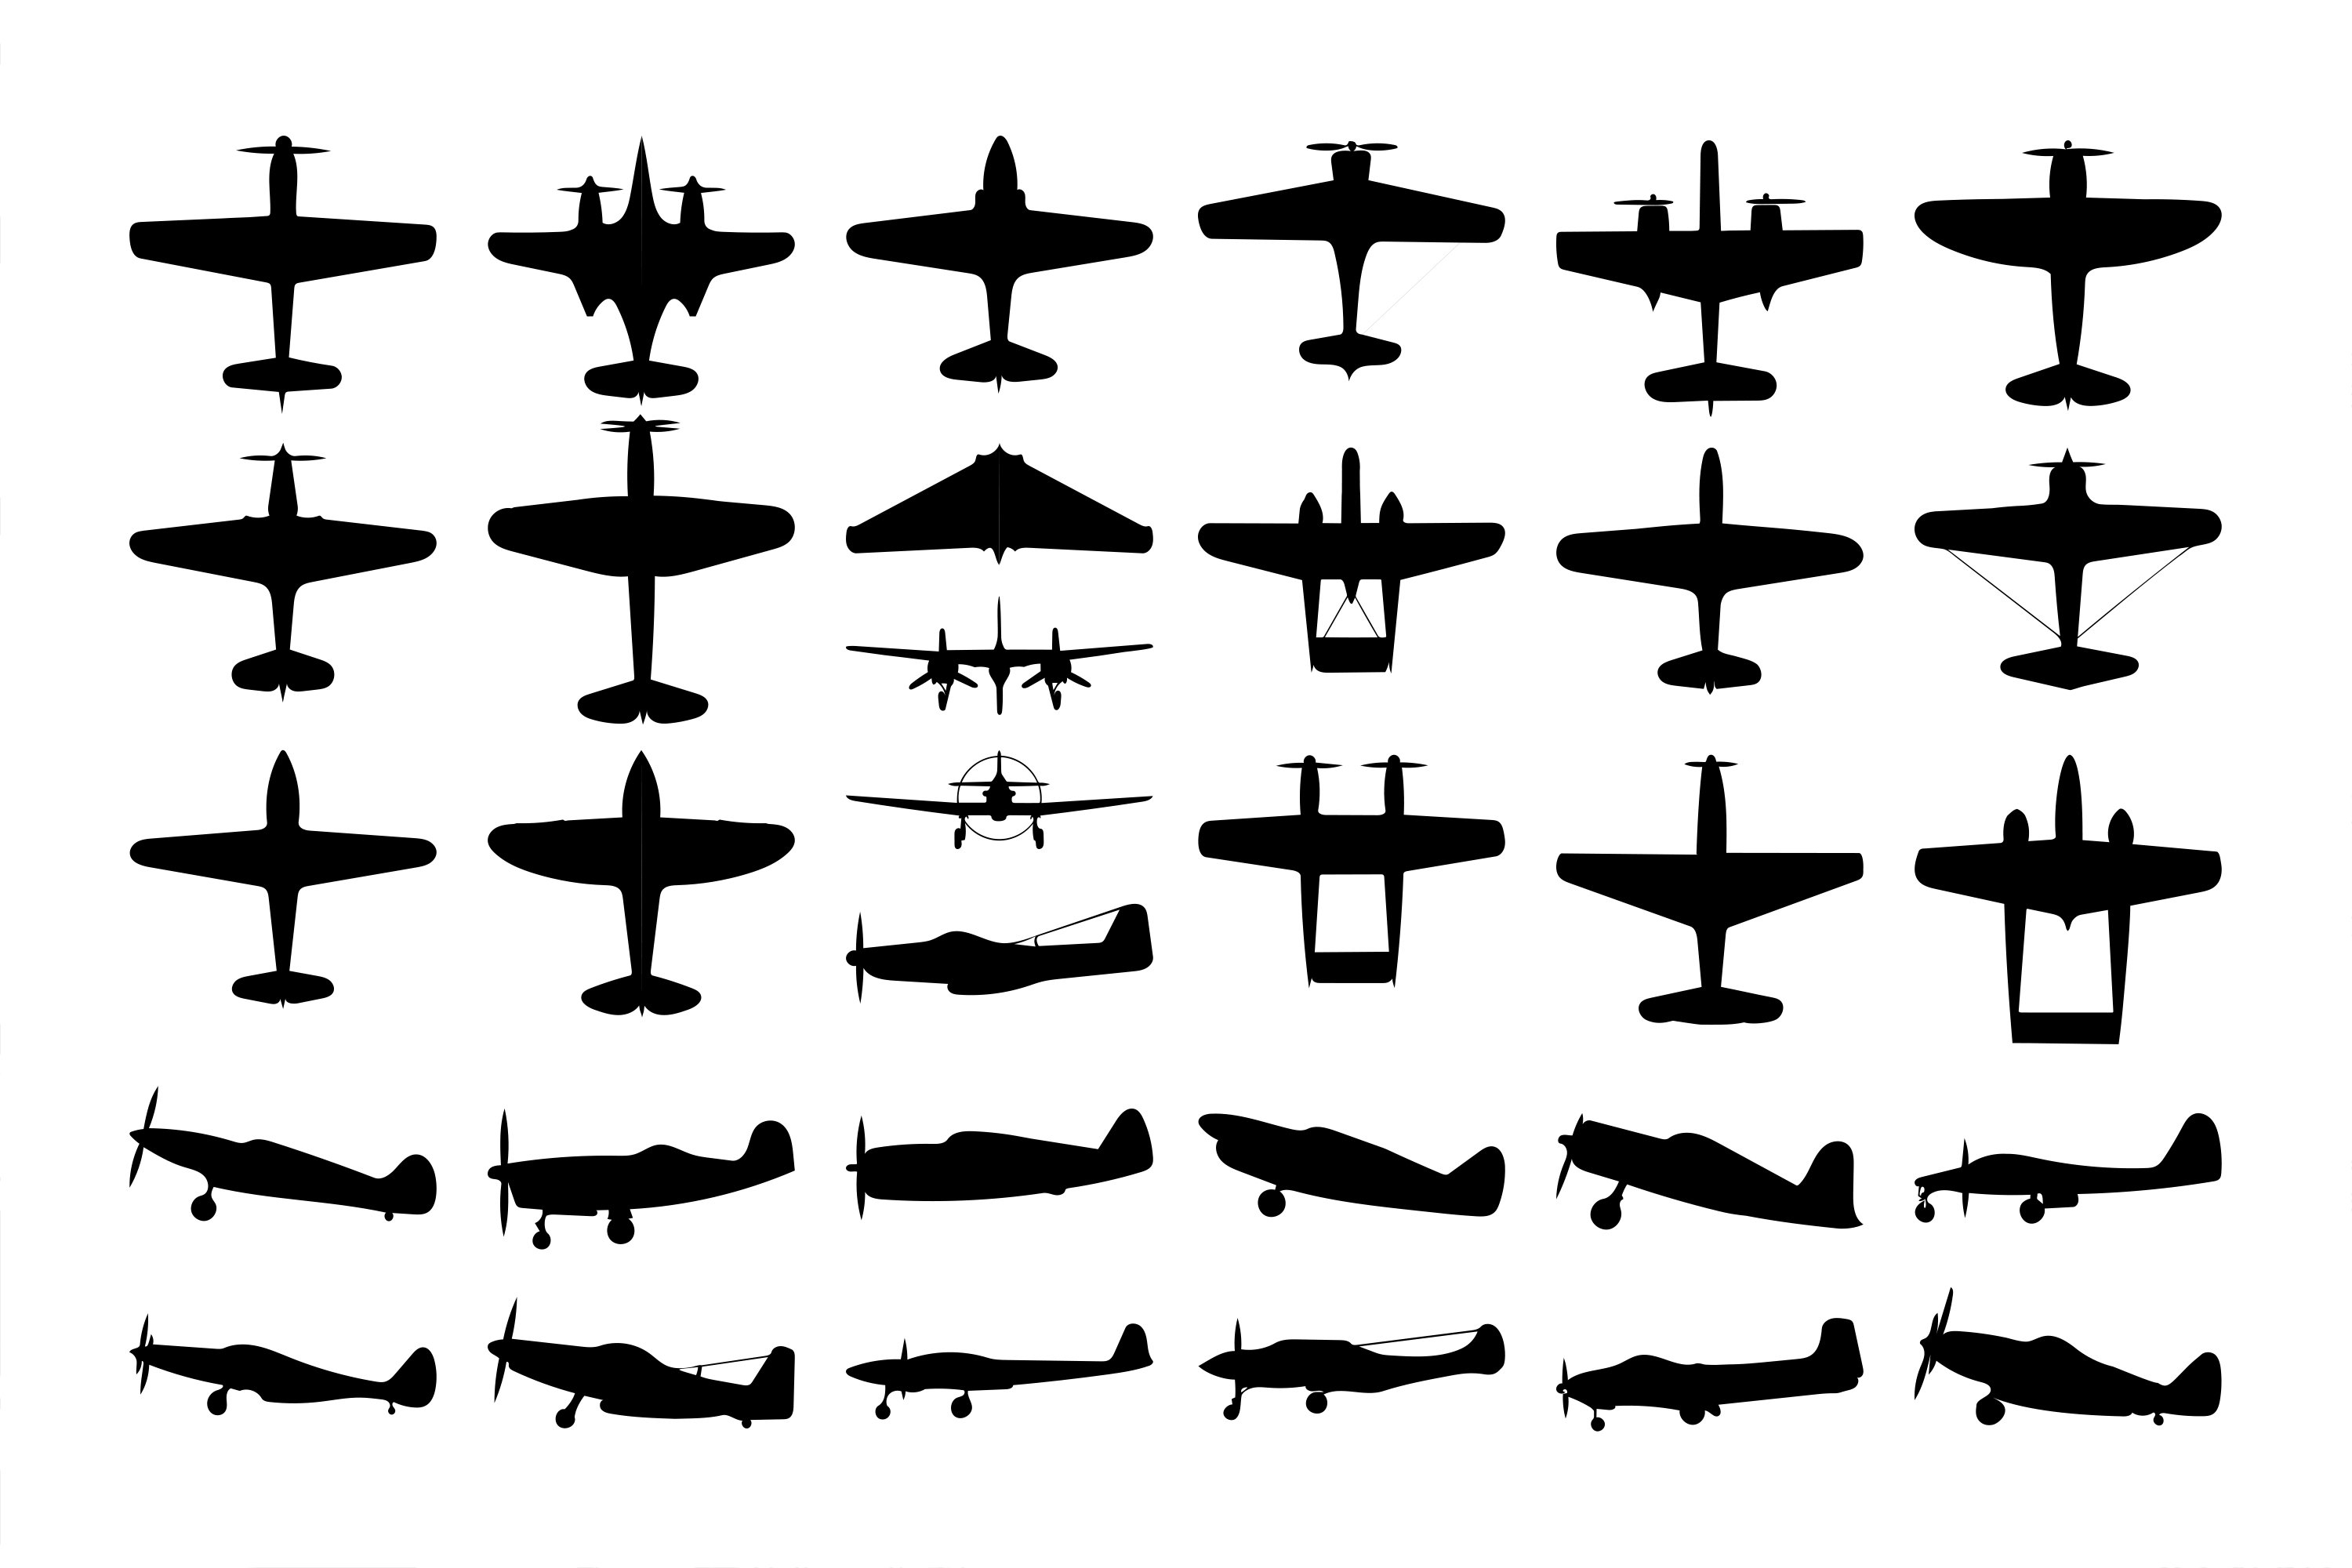 Black us military fighter airplanes.